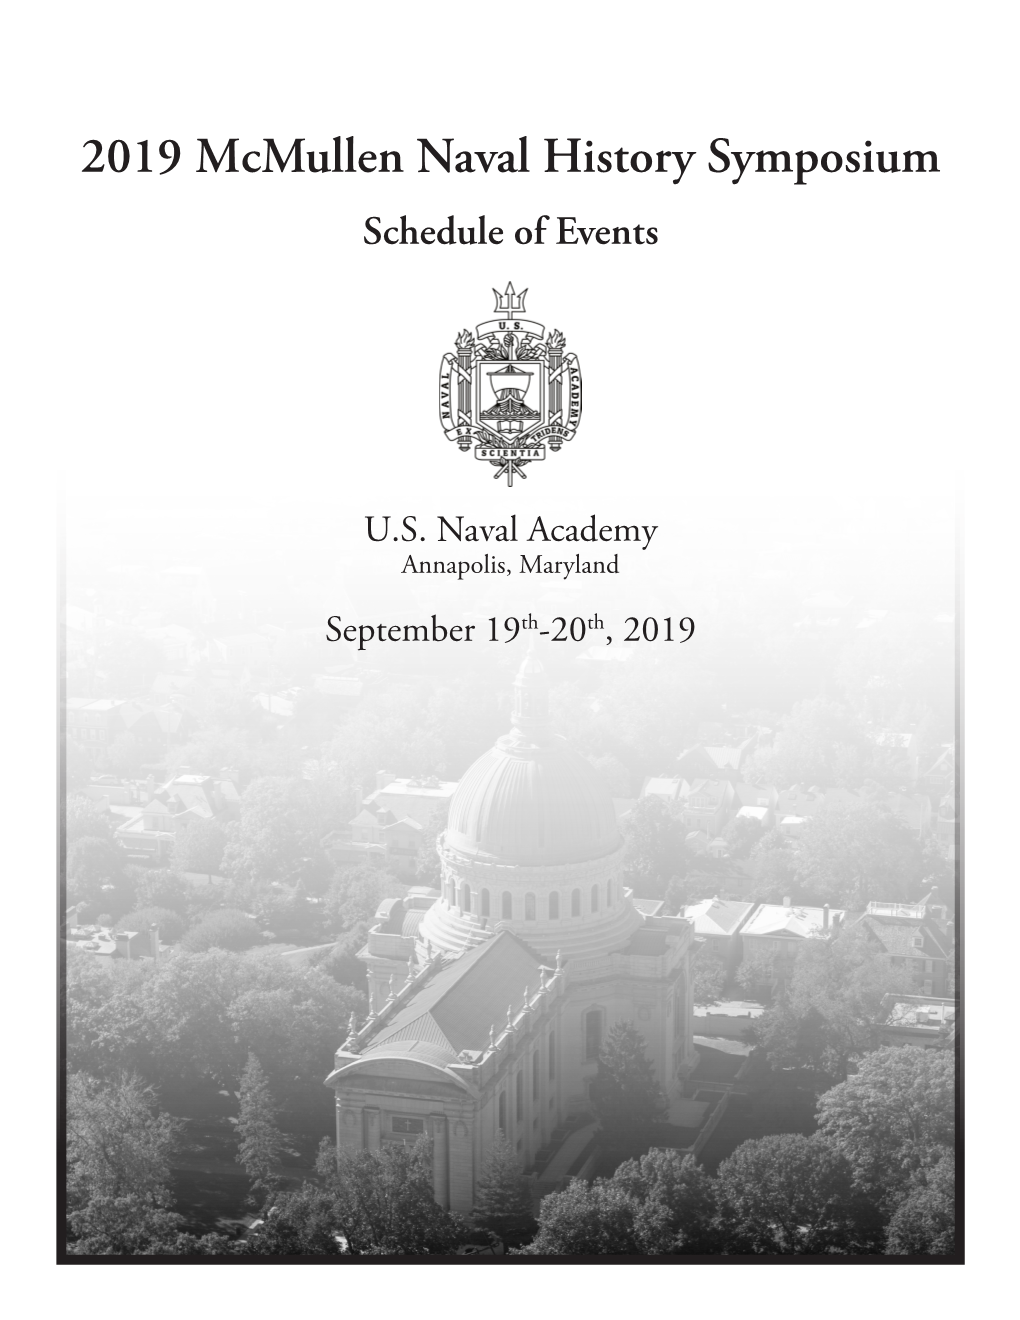 2019 Mcmullen Naval History Symposium Schedule of Events